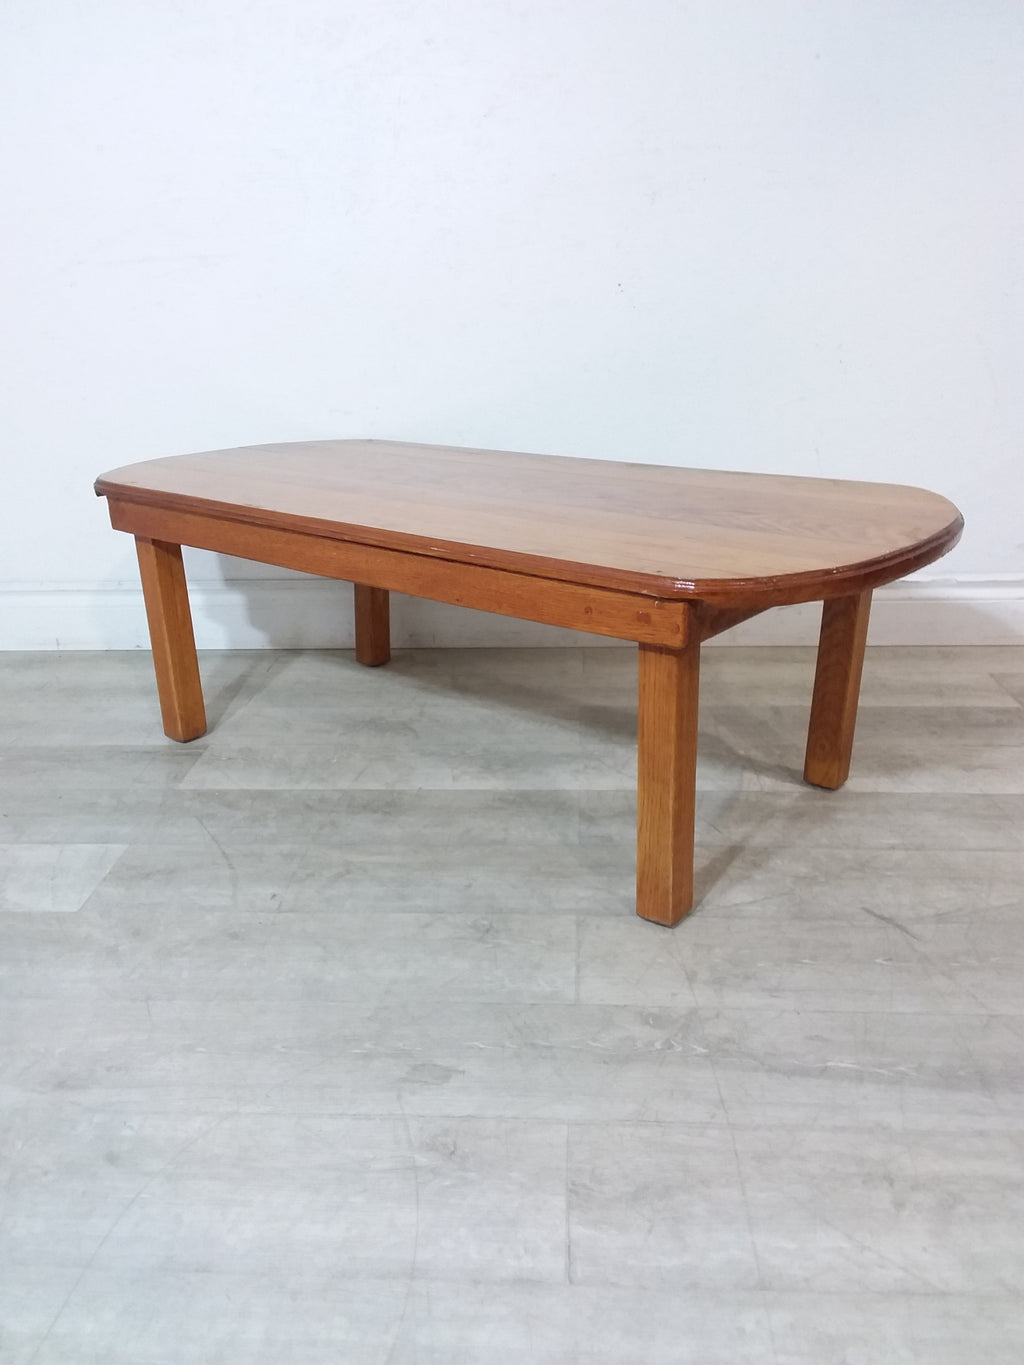 46" Wide Solid Wood Coffee Table